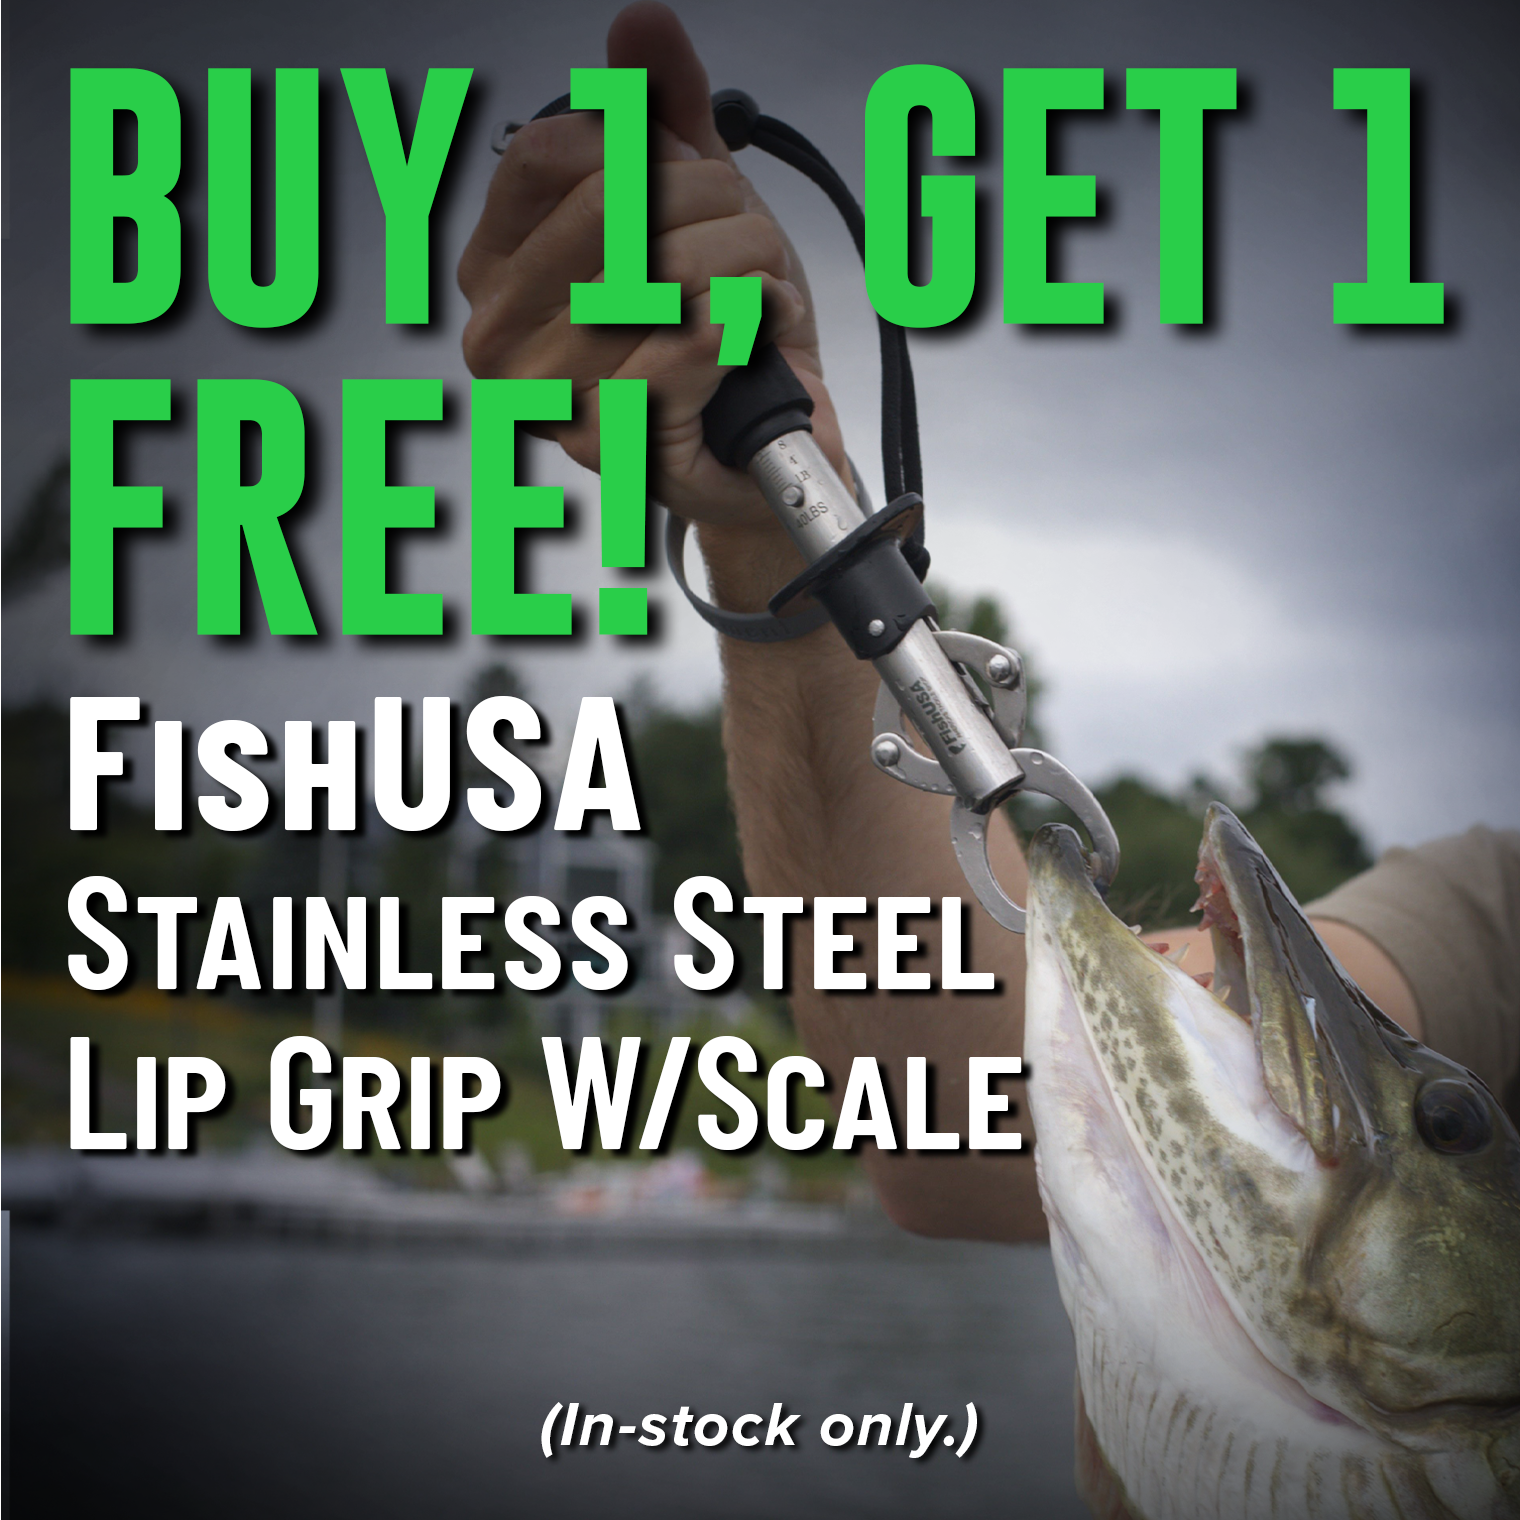 Buy 1, Get 1 Free! FishUSA Stainless Steel Lip Grip with Scale (Must add 2 to cart. In-stock only.)